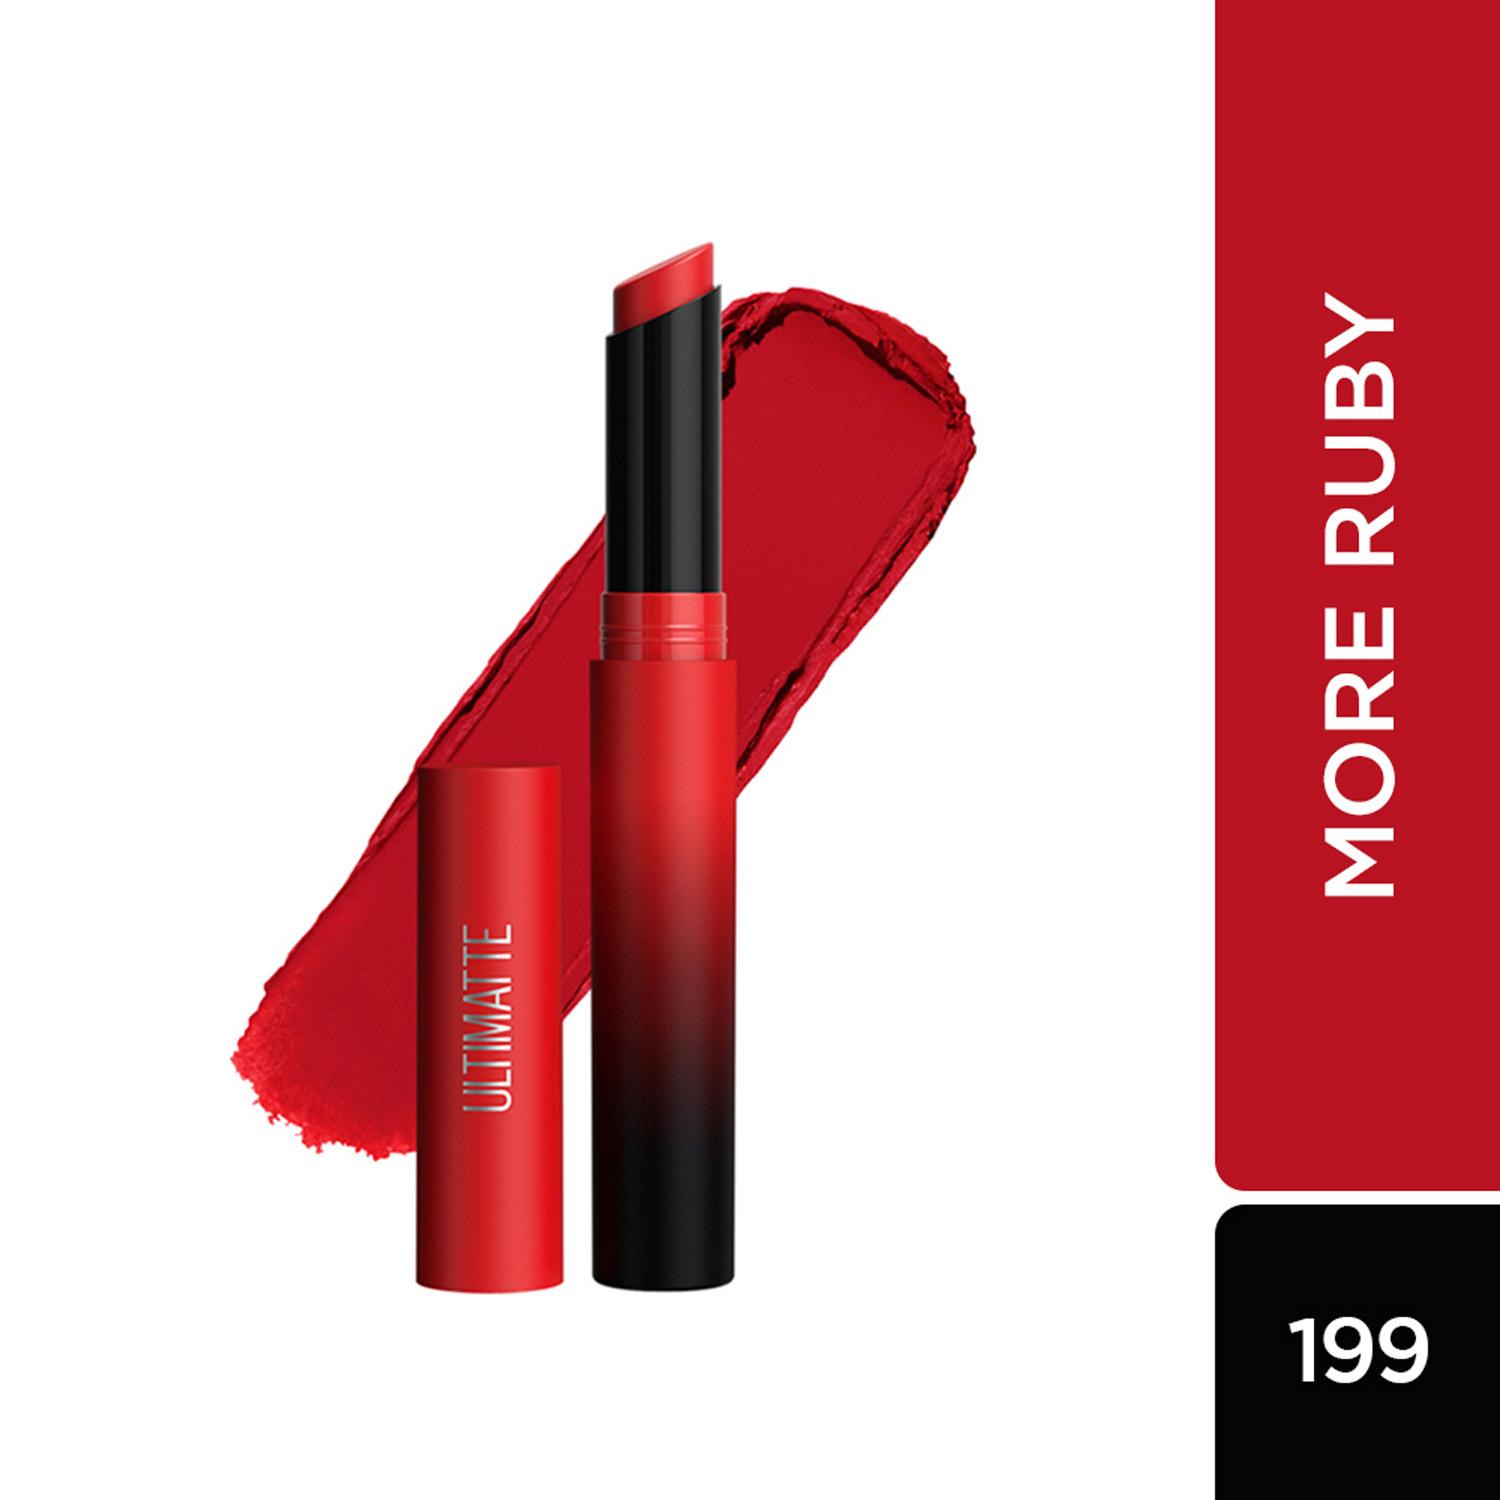 Maybelline New York | Maybelline New York Color Sensational Ultimattes Lipstick - More Ruby (1.7g)